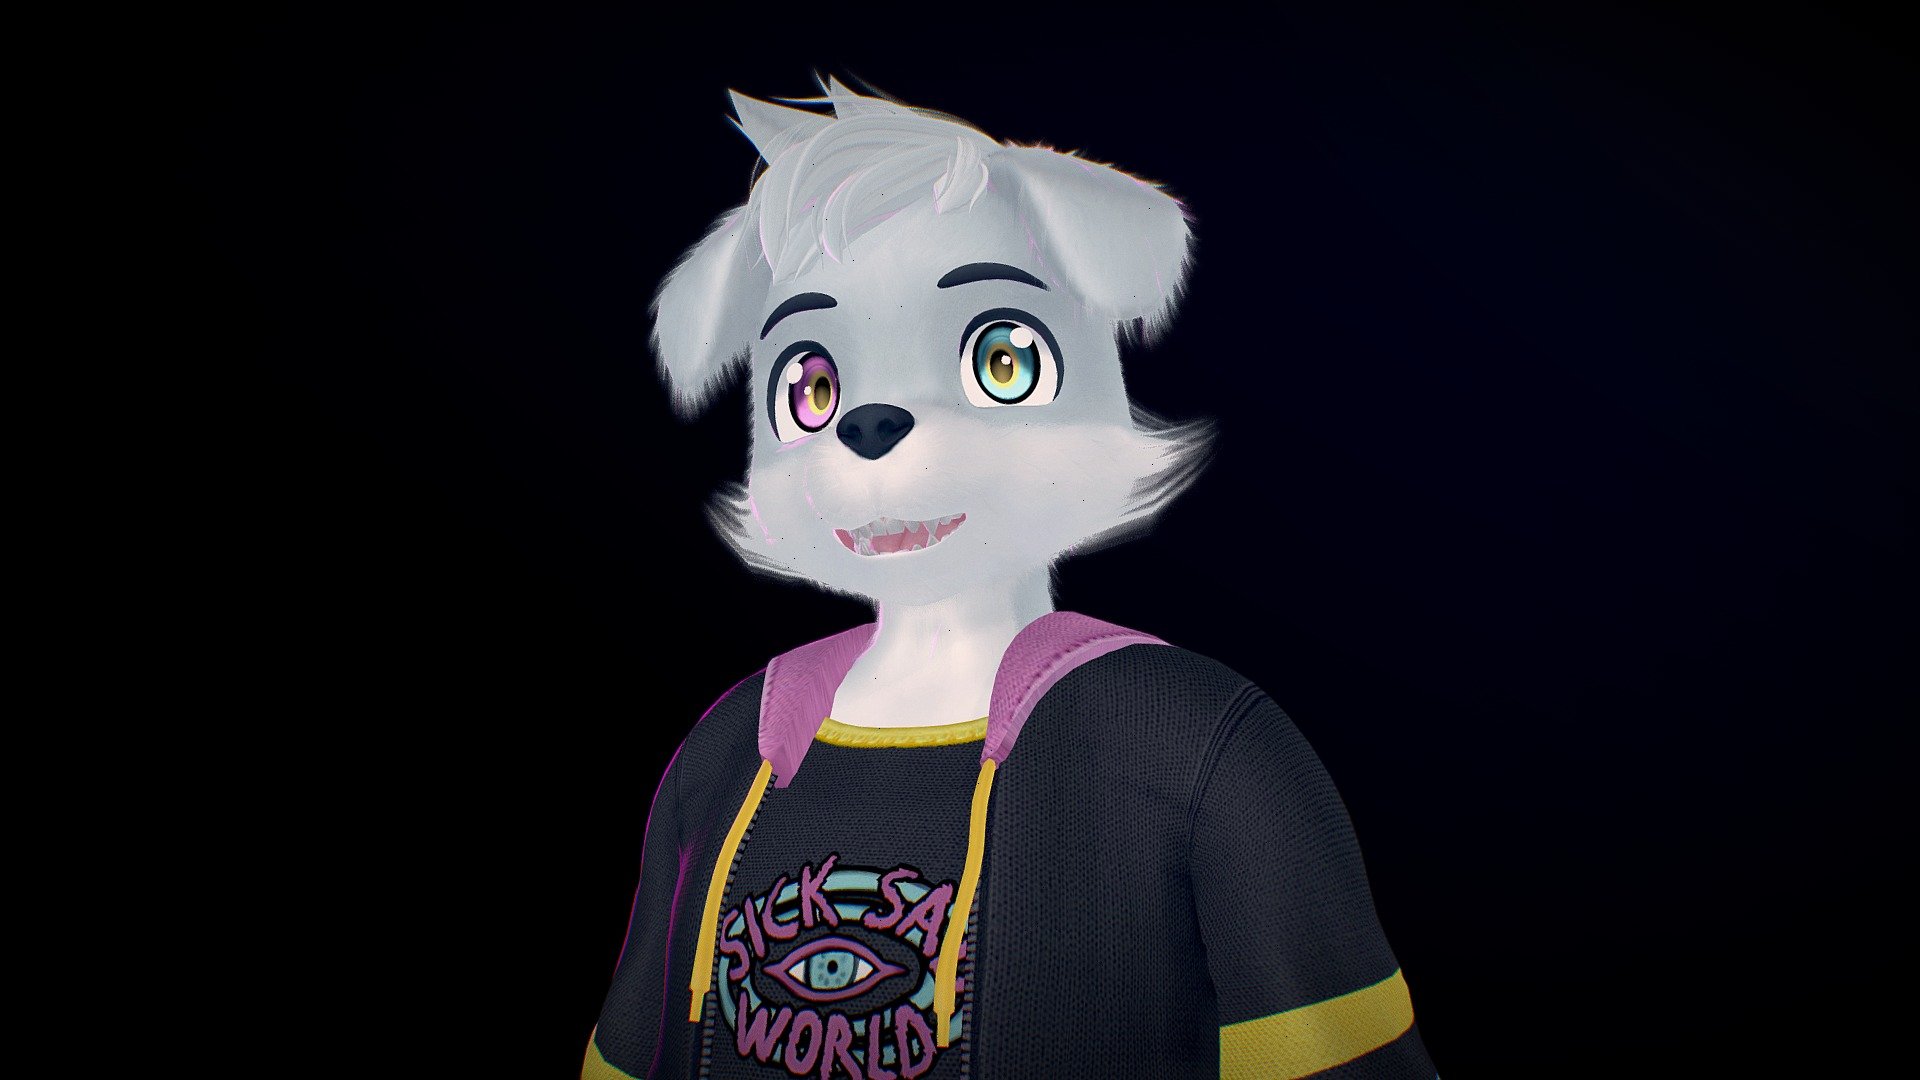 commissions: https://www.furaffinity.net/commissions/hickysnow/ - Aephyx - 3D model by HickySnow (@Hicky_Snow) 3d model